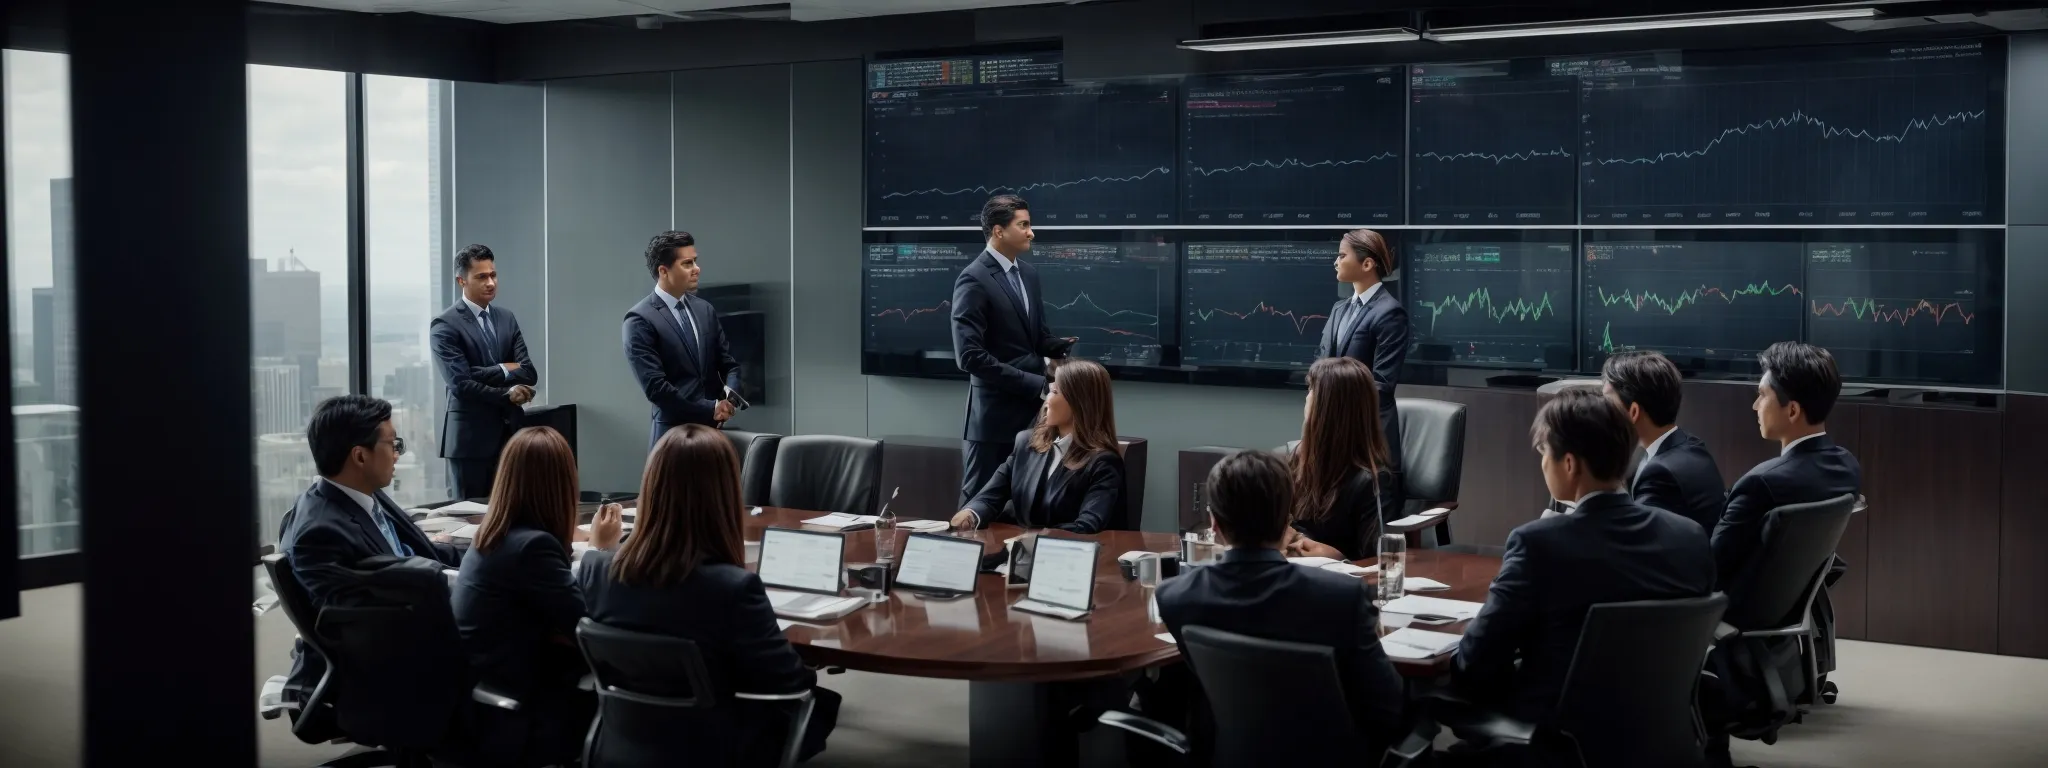 a panoramic view of a corporate boardroom with men and women in business attire, displaying graphs and charts on a large screen.